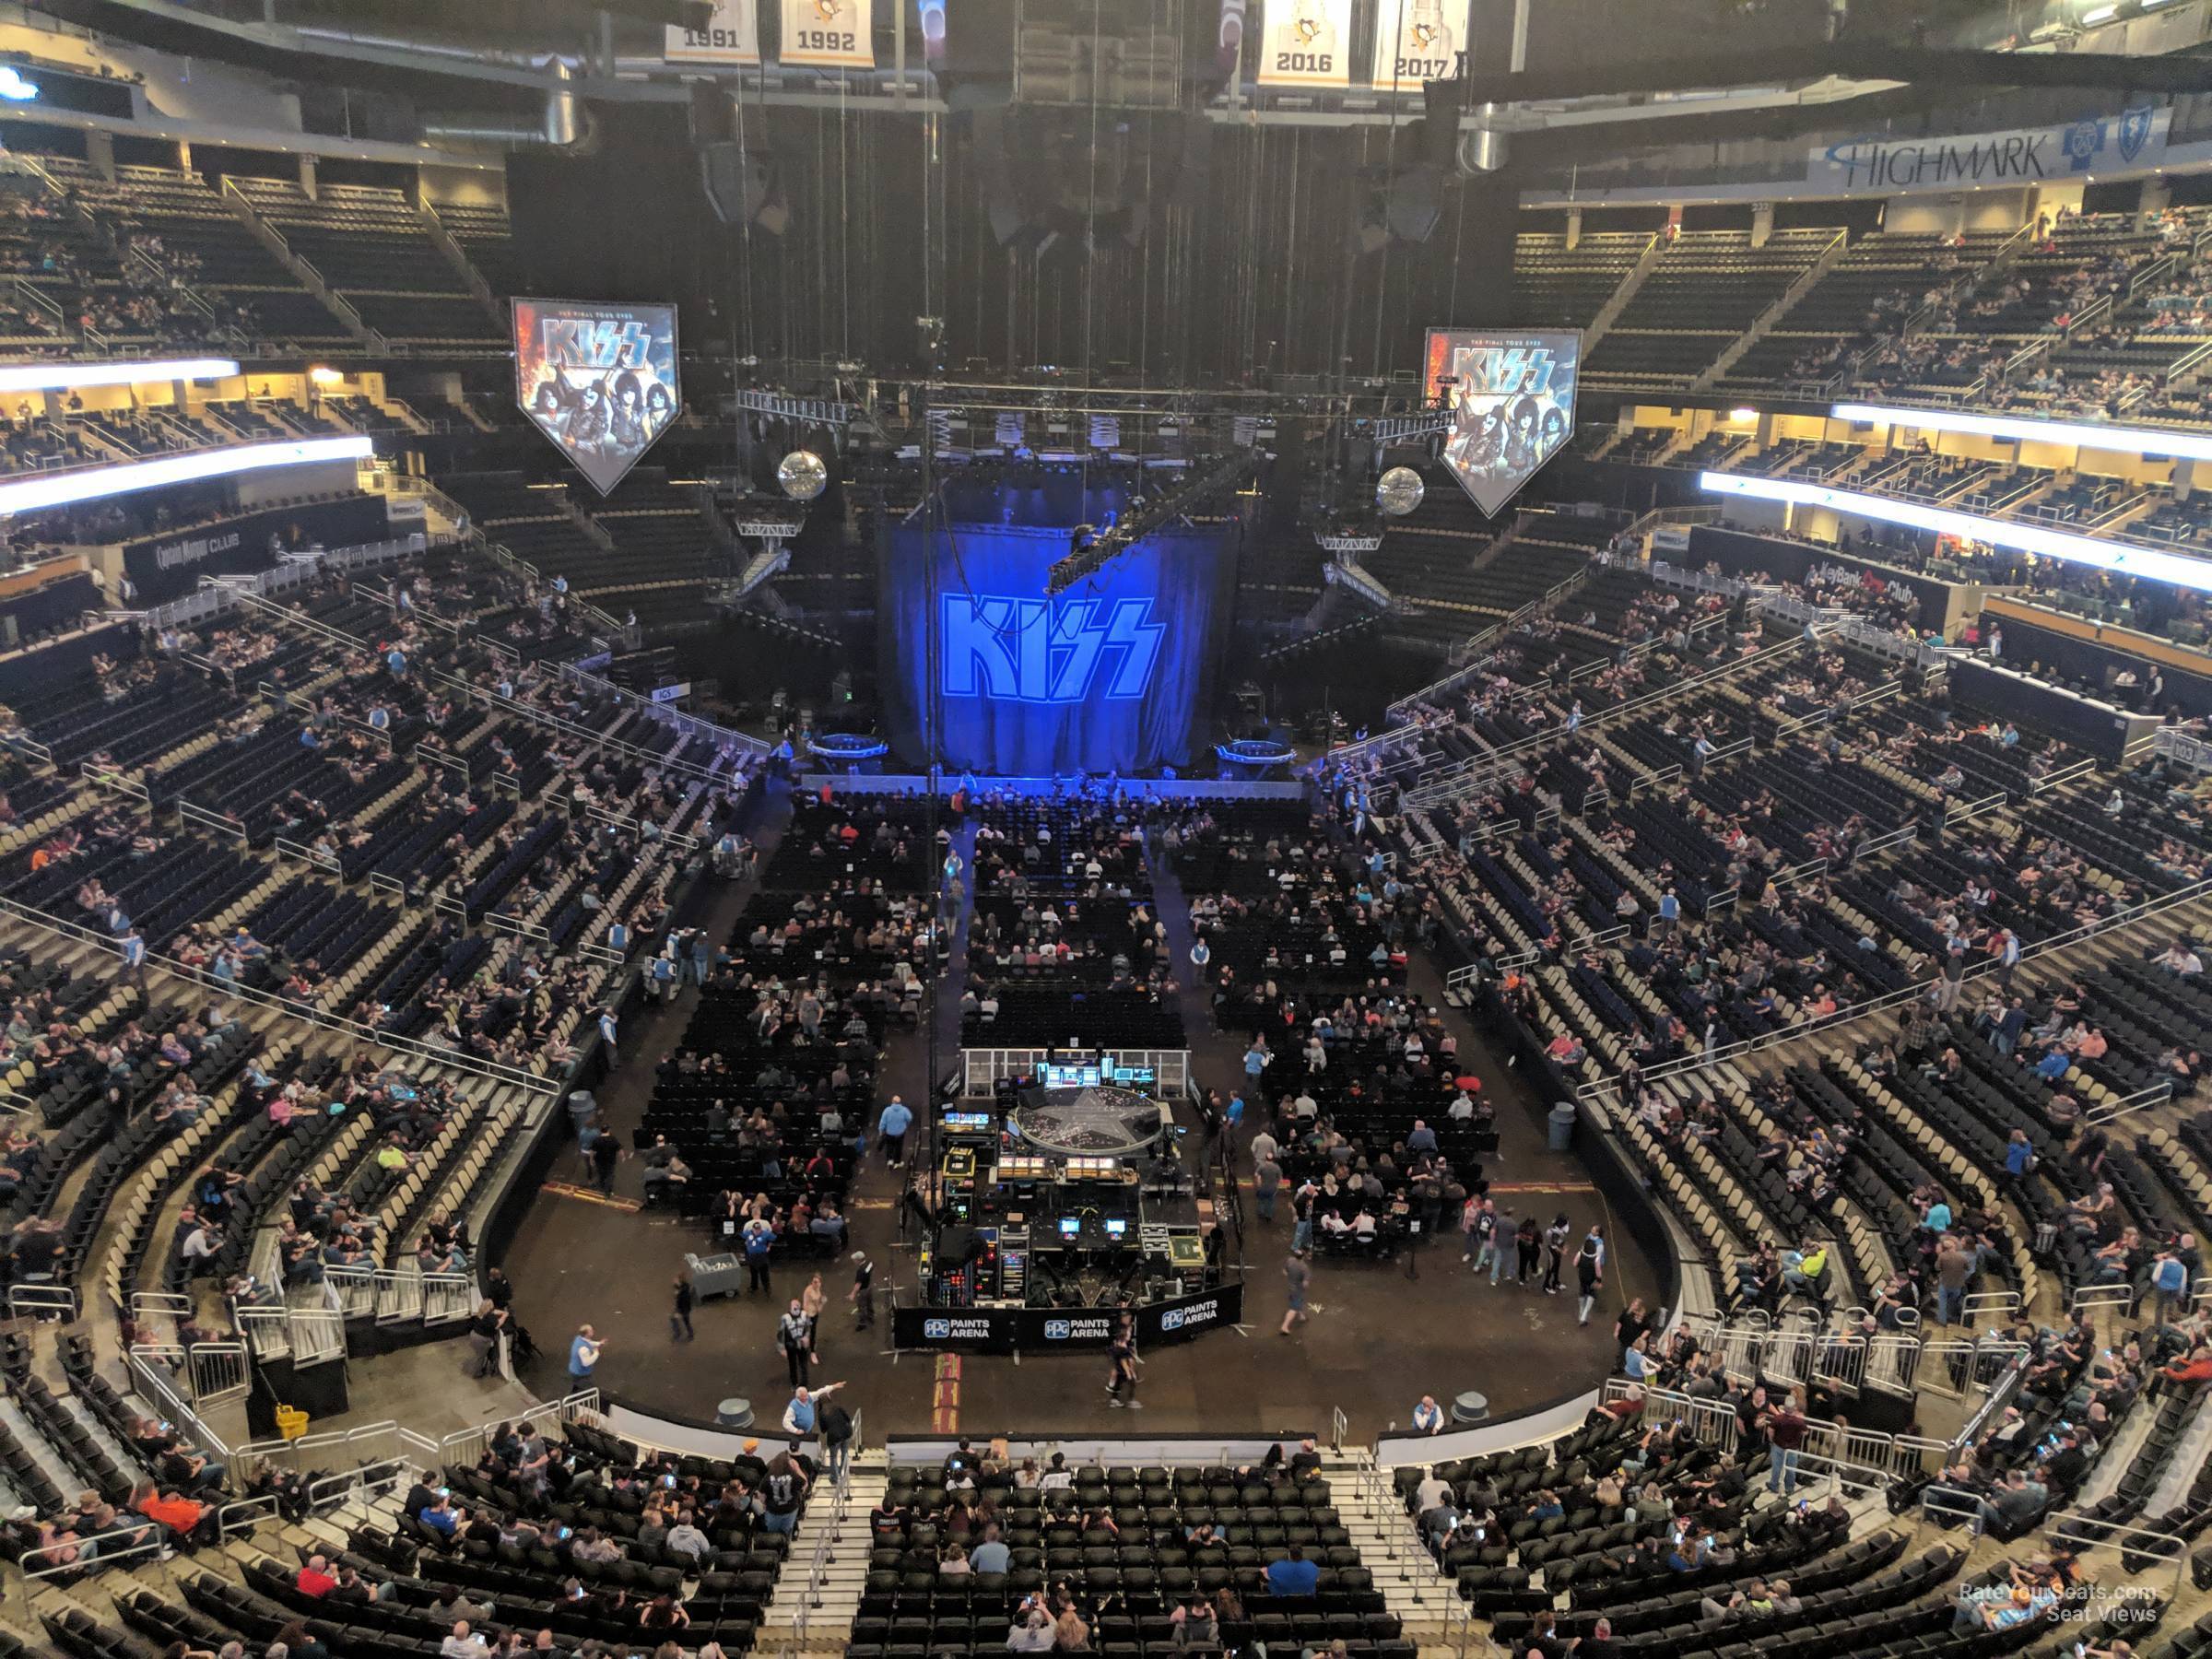 section 211, row c seat view  for concert - ppg paints arena